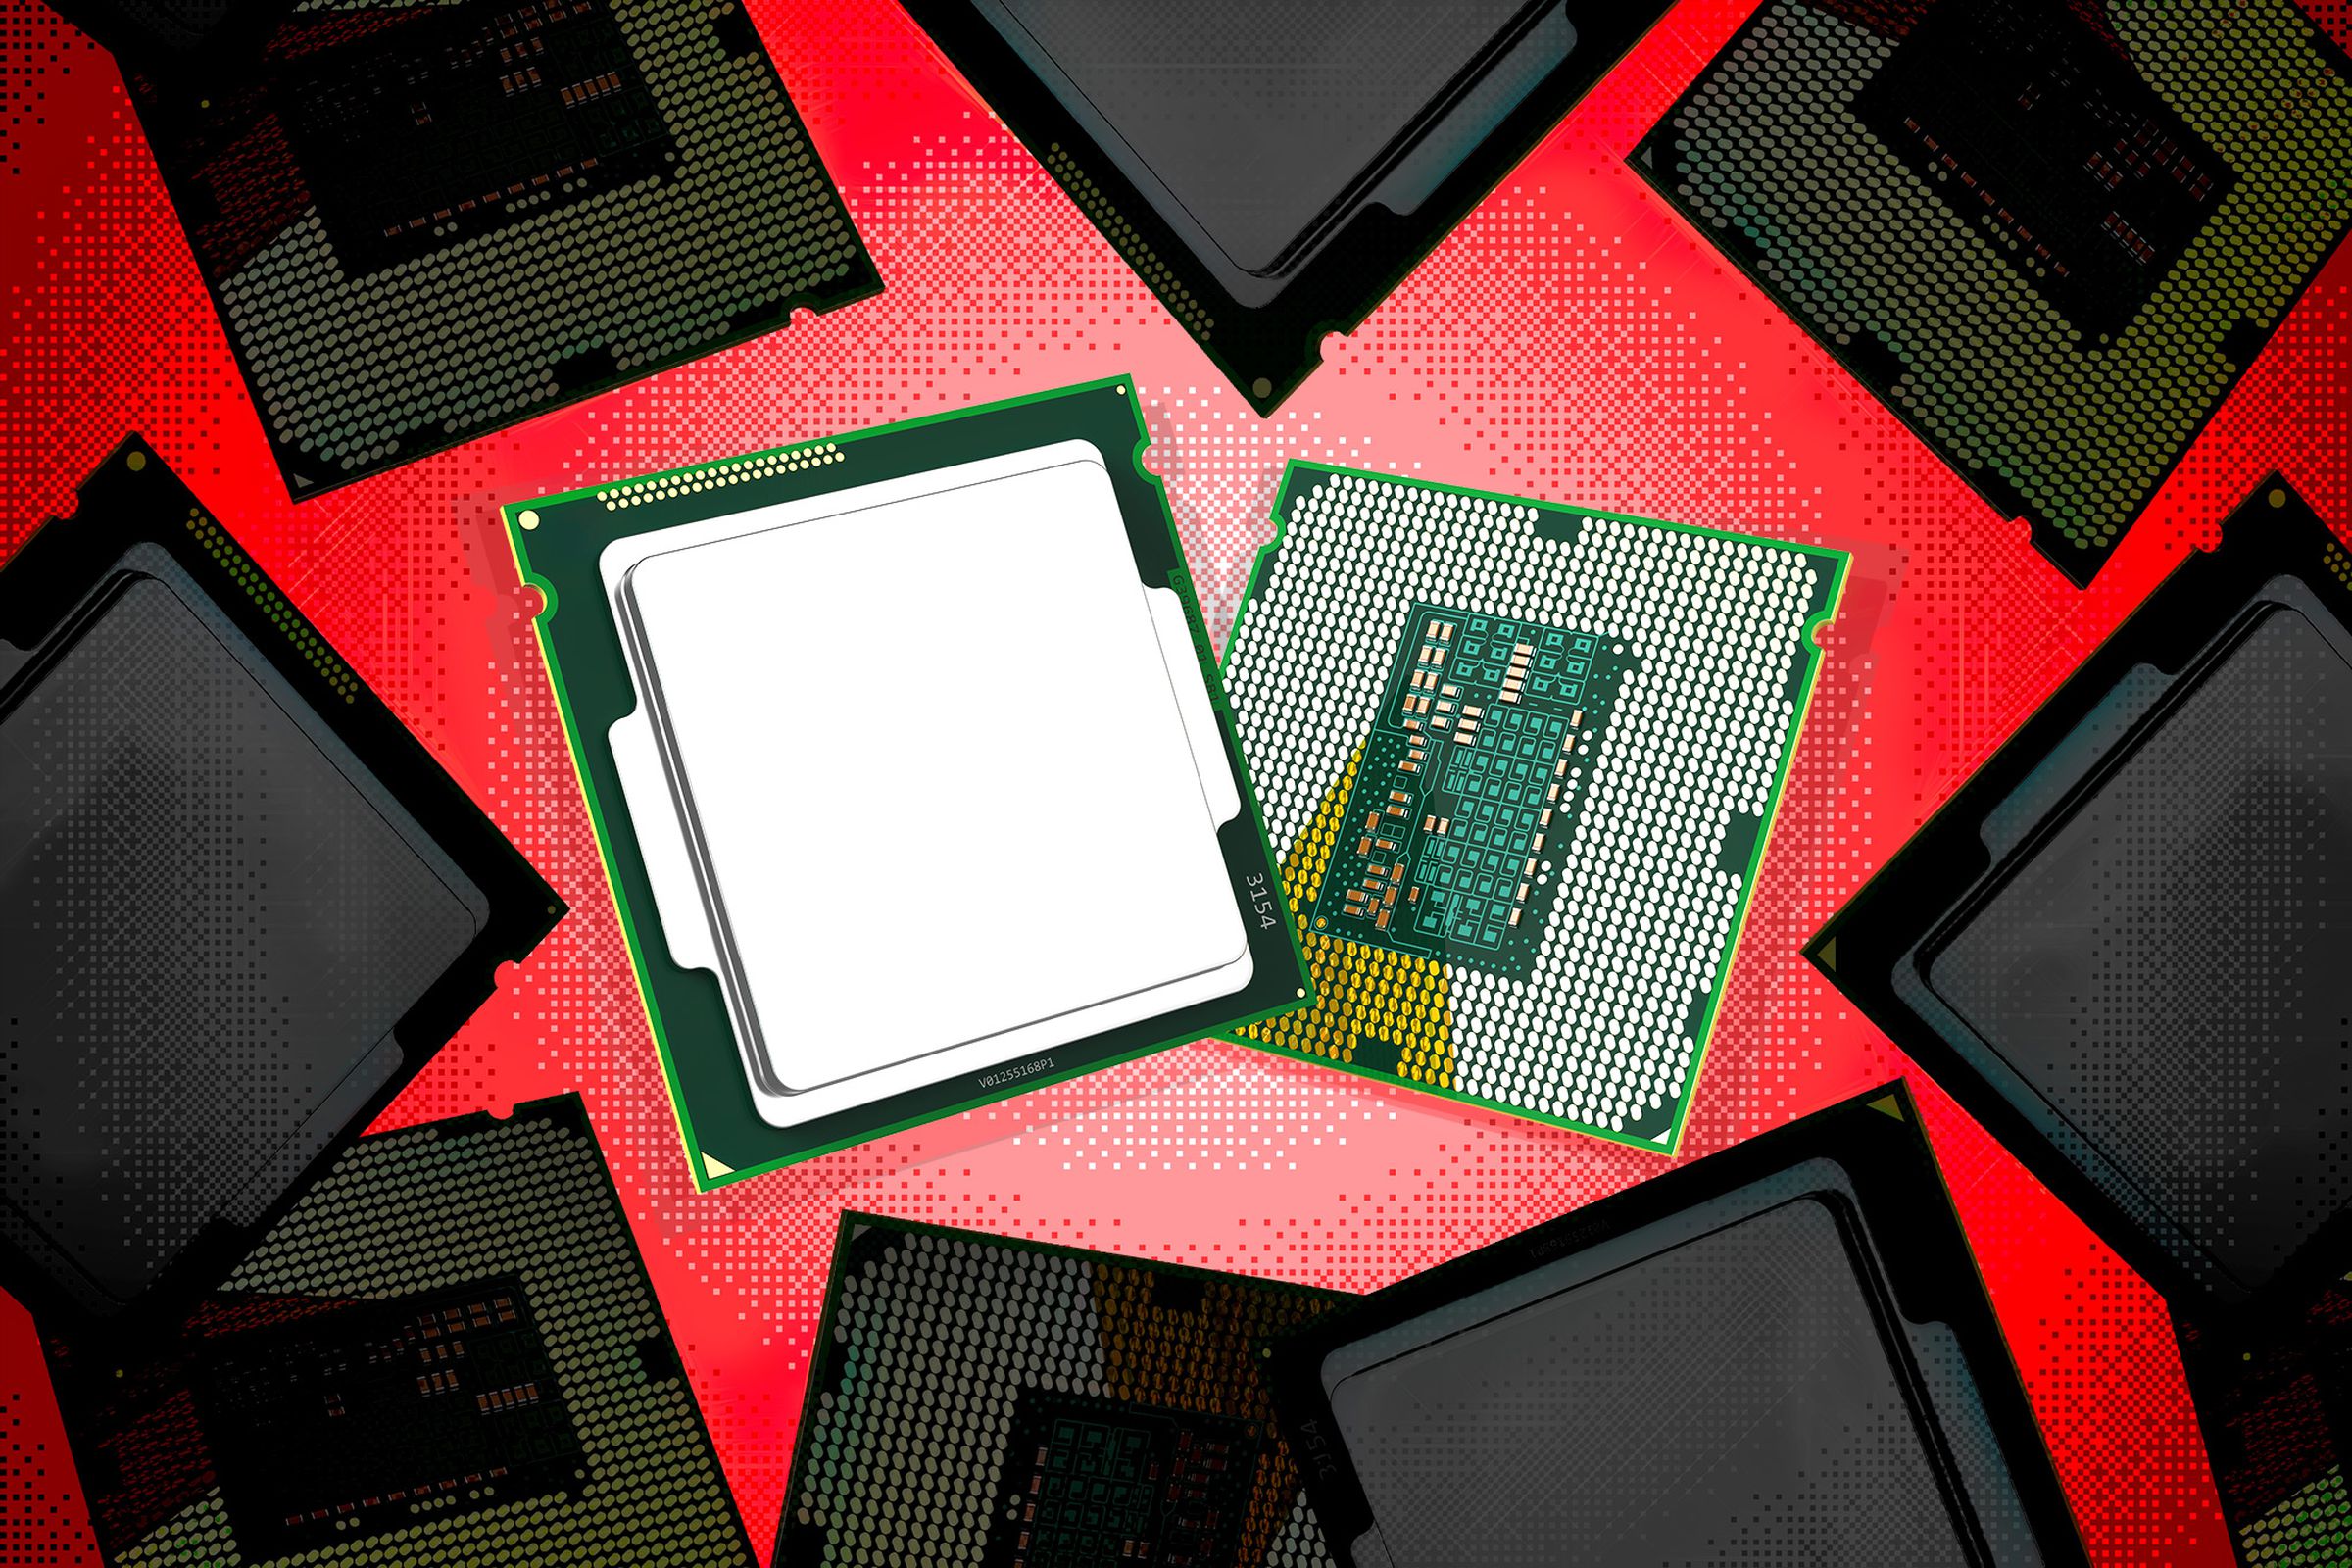 CPUs surrounded by shadowy ones, kinda spooky and the background is red